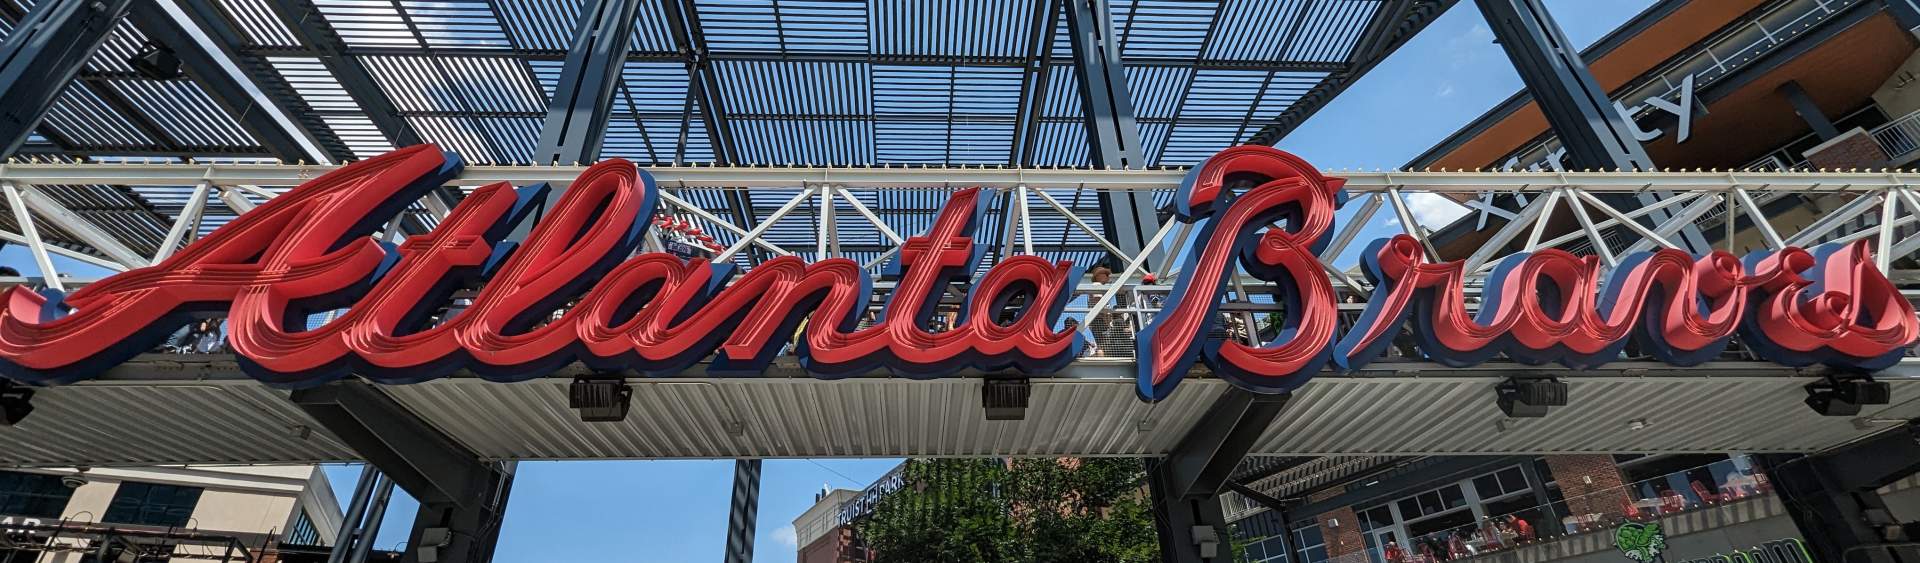 The Best Place to Stay for The Atlanta Braves Game